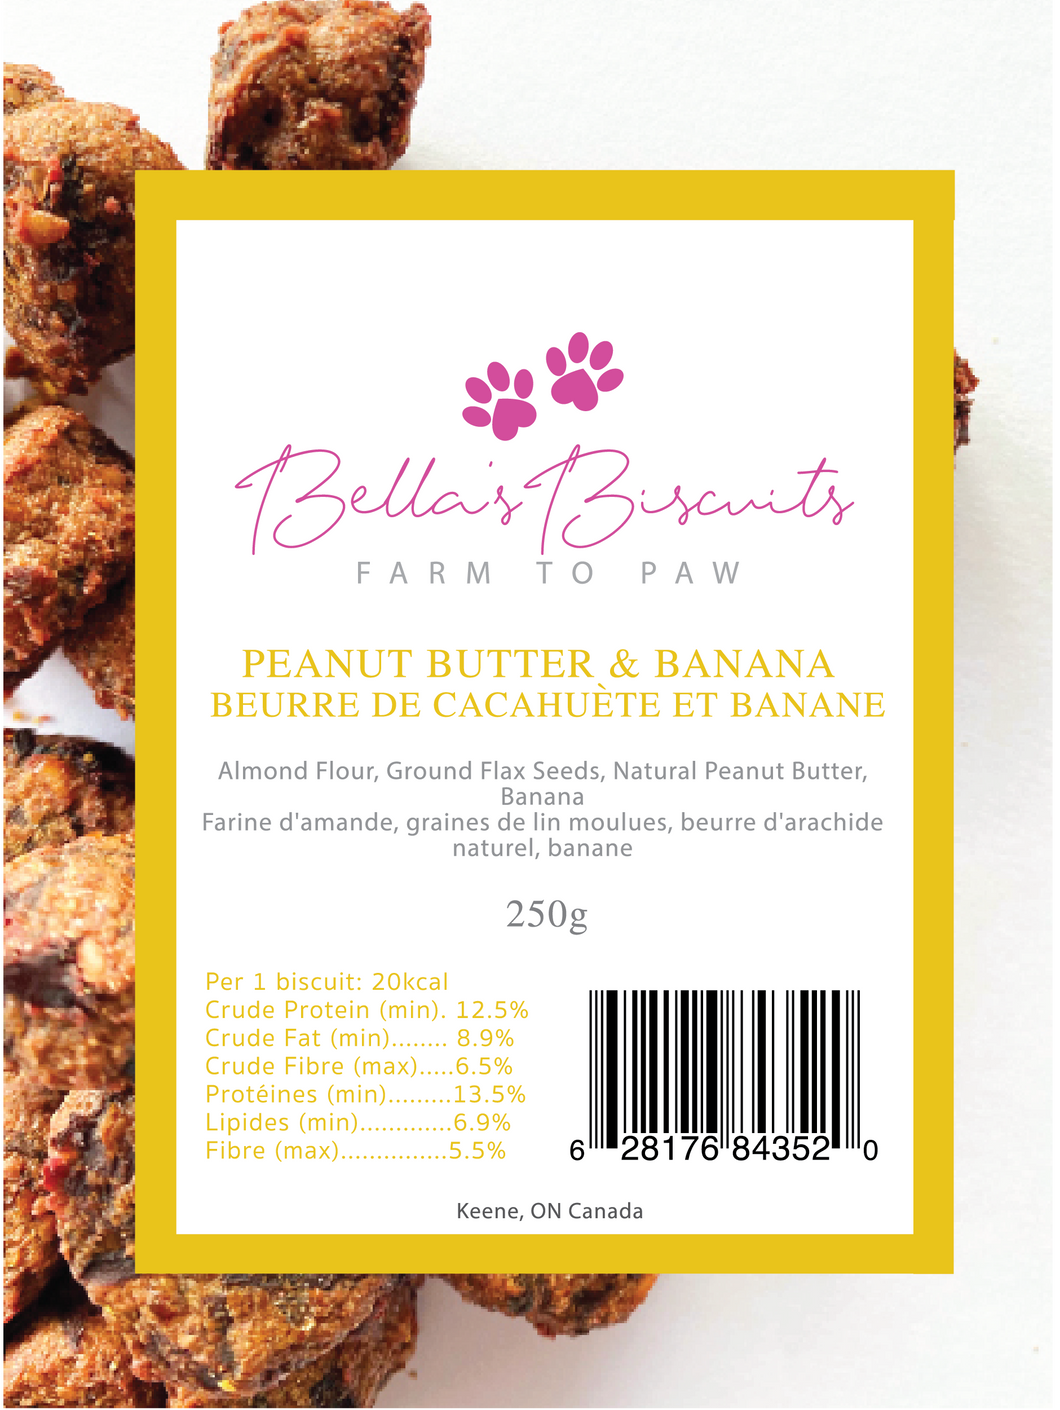 Bella's Biscuits - Peanut Butter and Banana